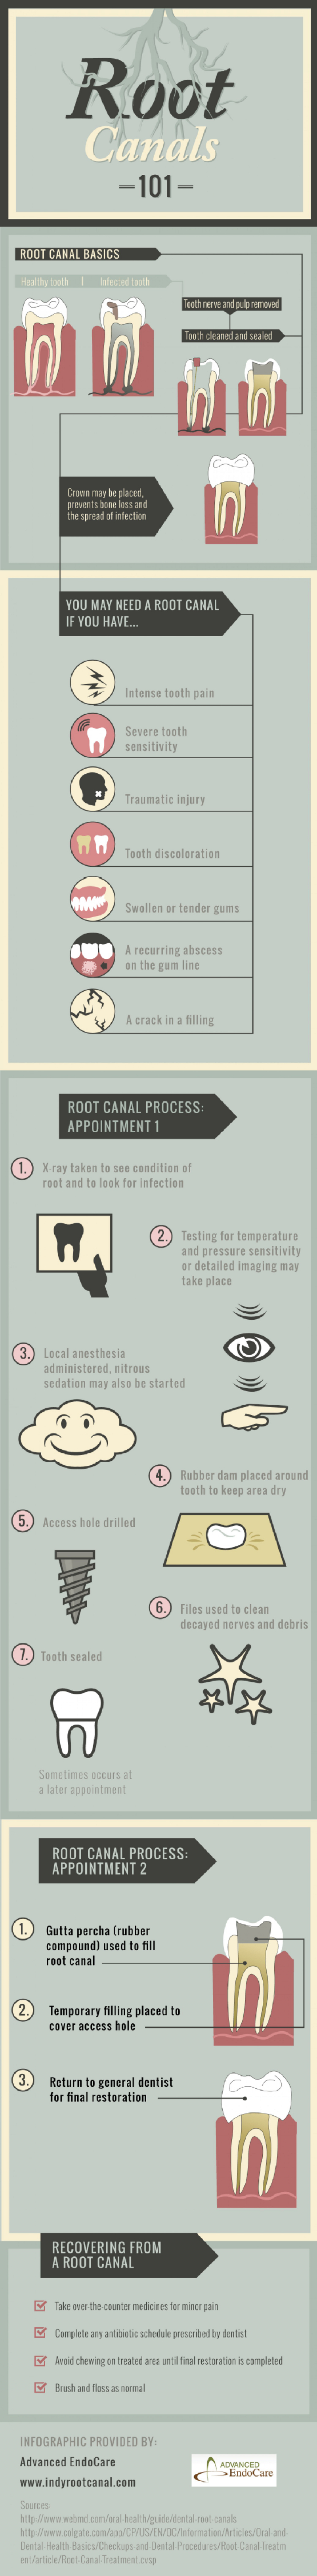 Root Canal Facts